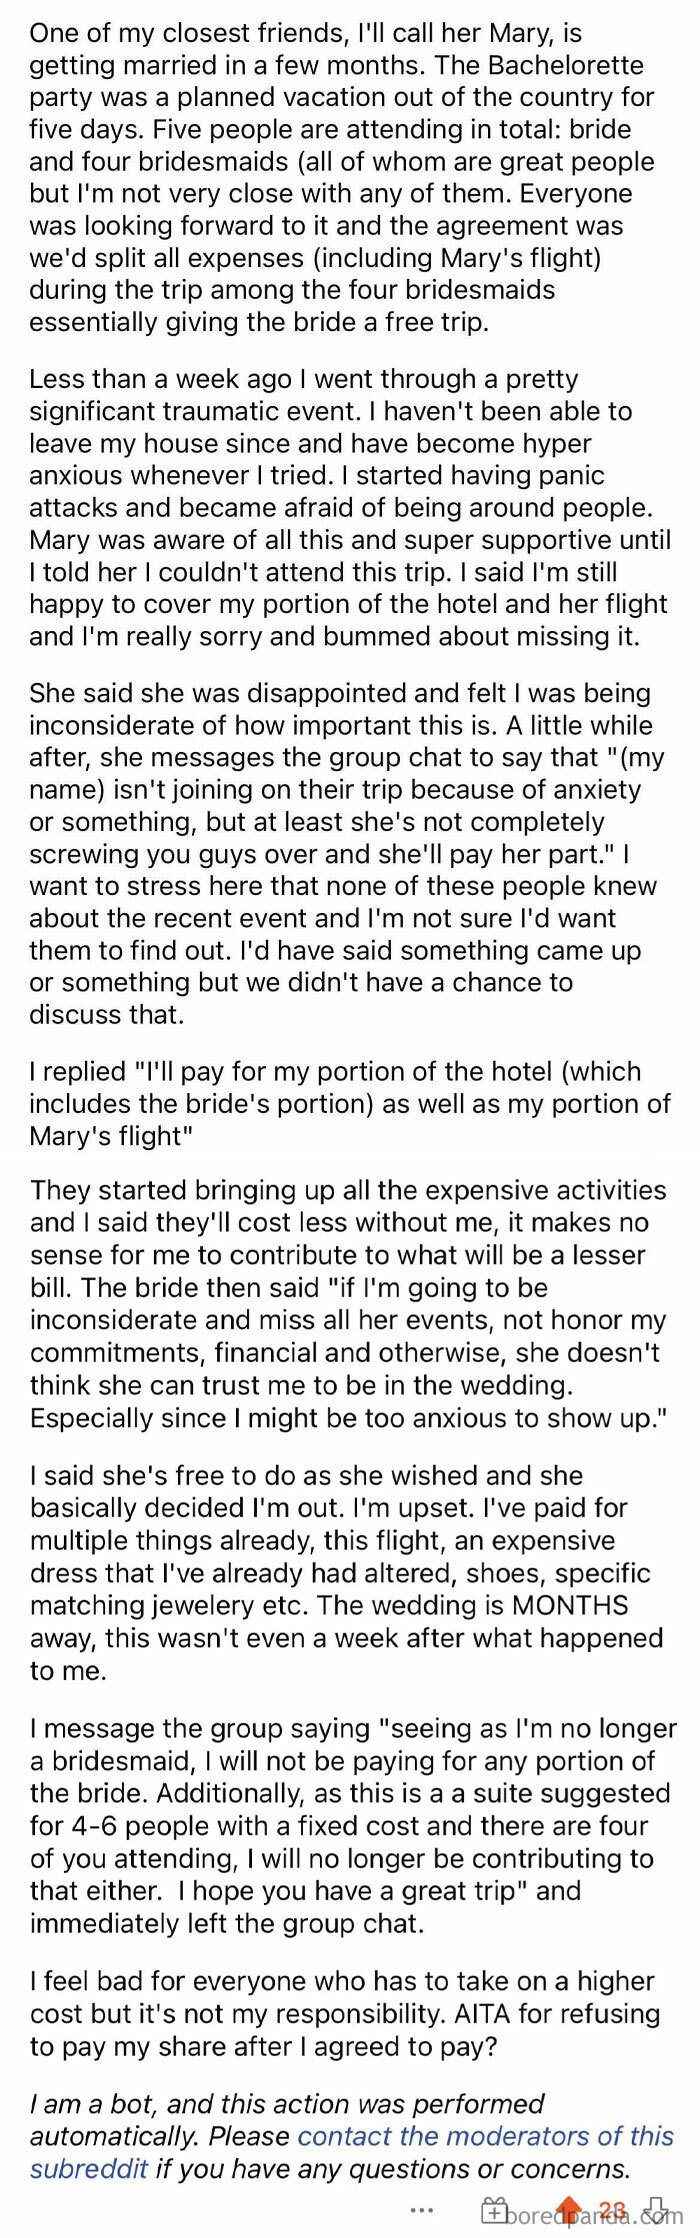 Entitled Bridezilla Removes Bridesmaid For Developing Anxiety After A Traumatic Incident, And Still Expects Her To Pay!